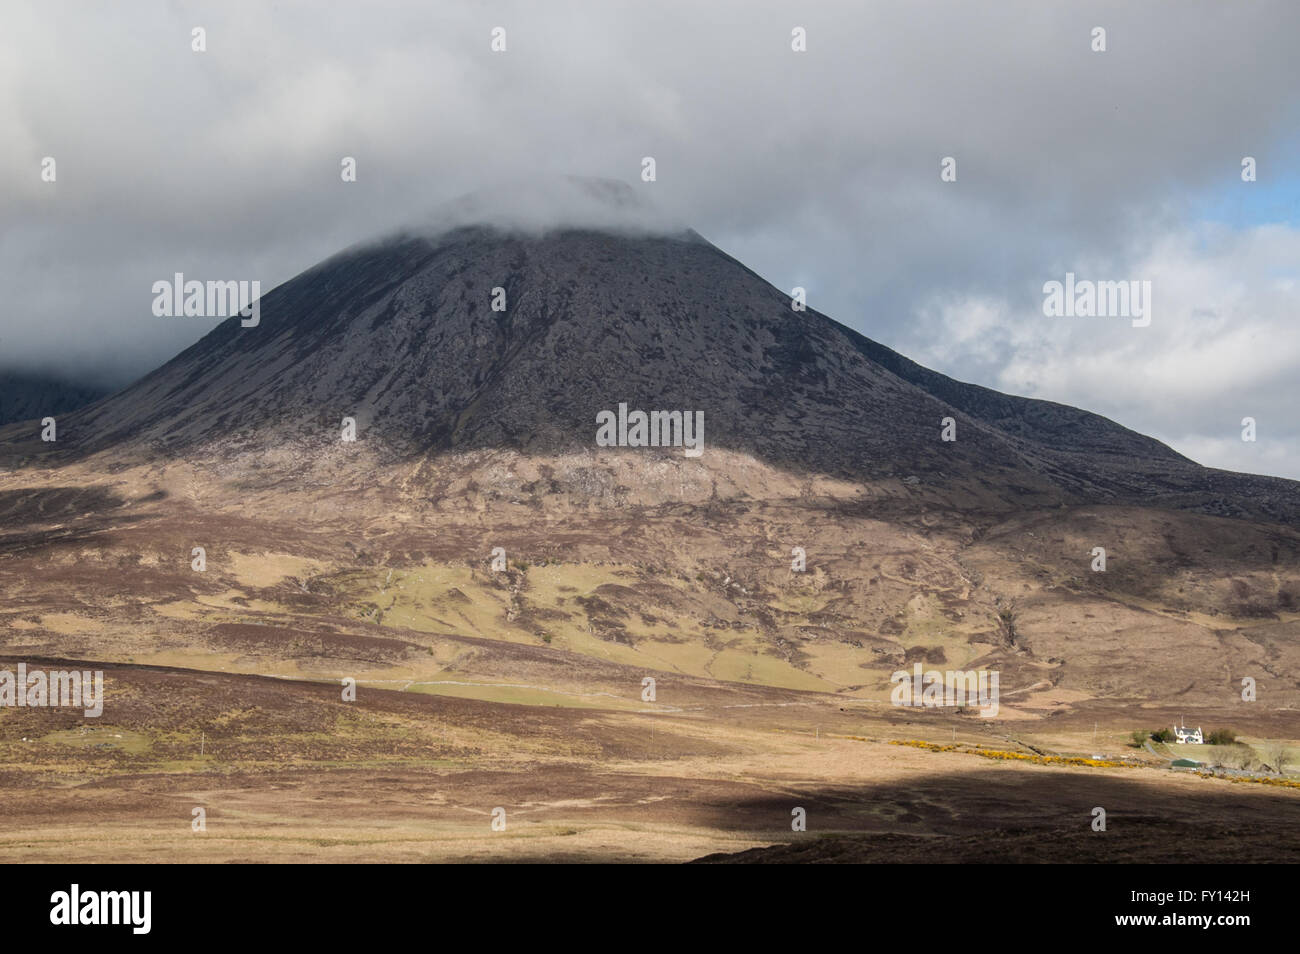 Barren Scottish mountain with the top covered in clouds. Small white house at the bottom. Stock Photo